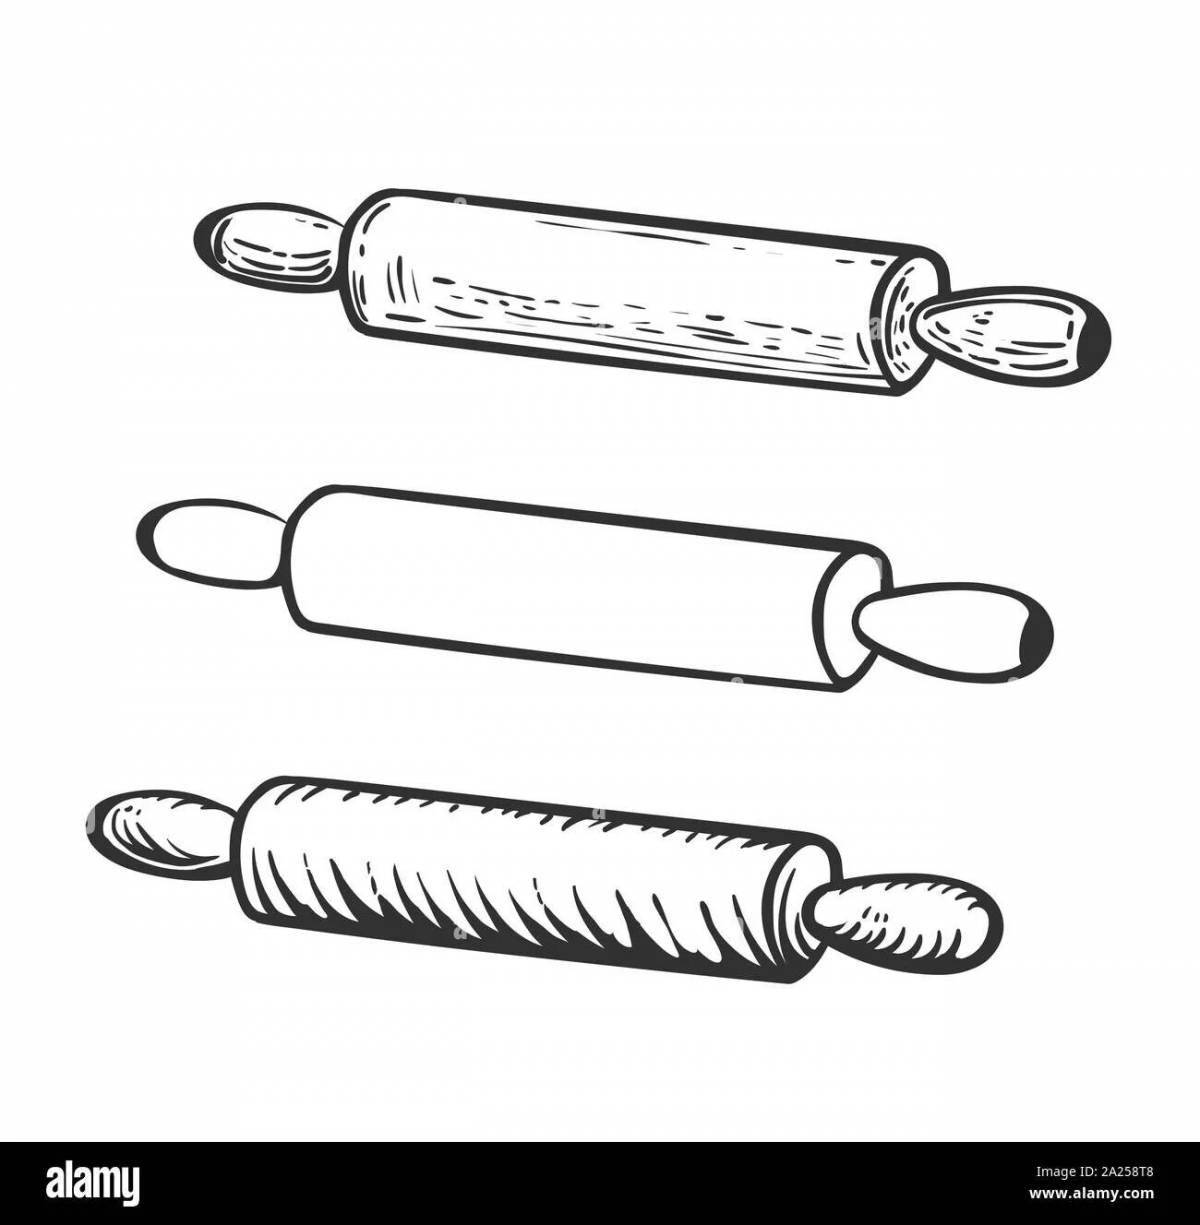 Radiant rolling pin coloring page for kids